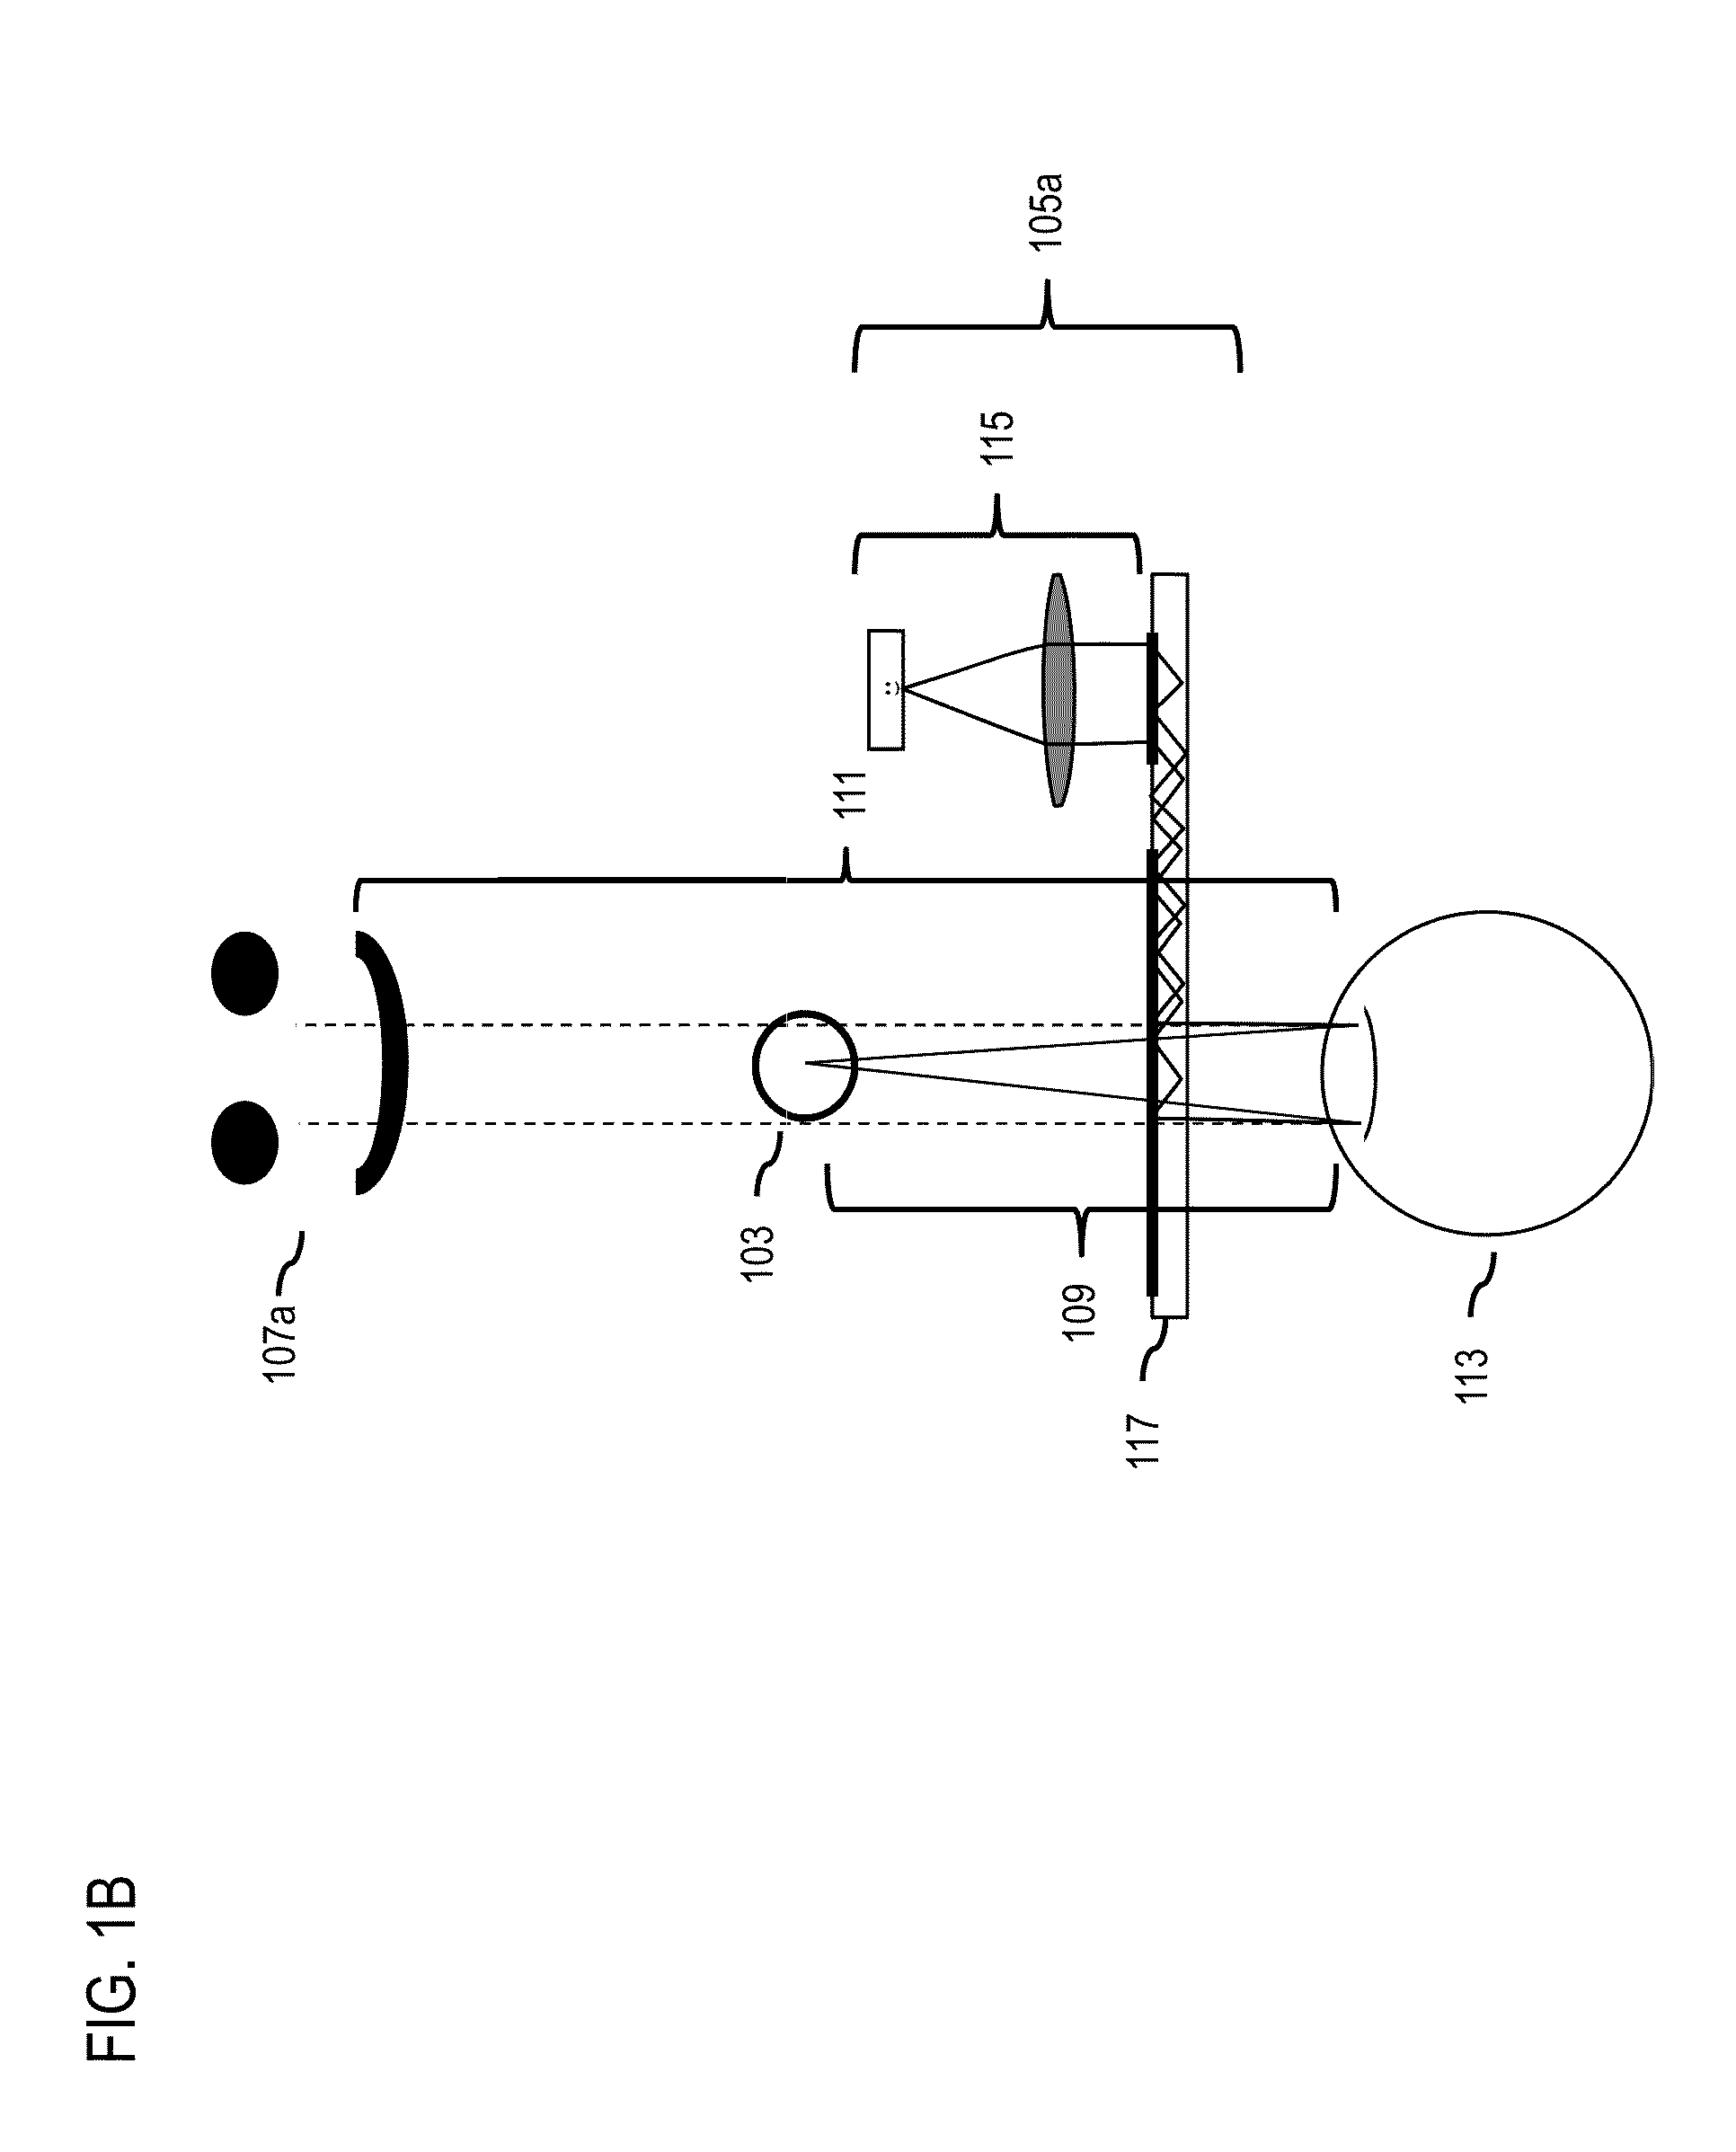 Method and apparatus for providing focus correction of displayed information